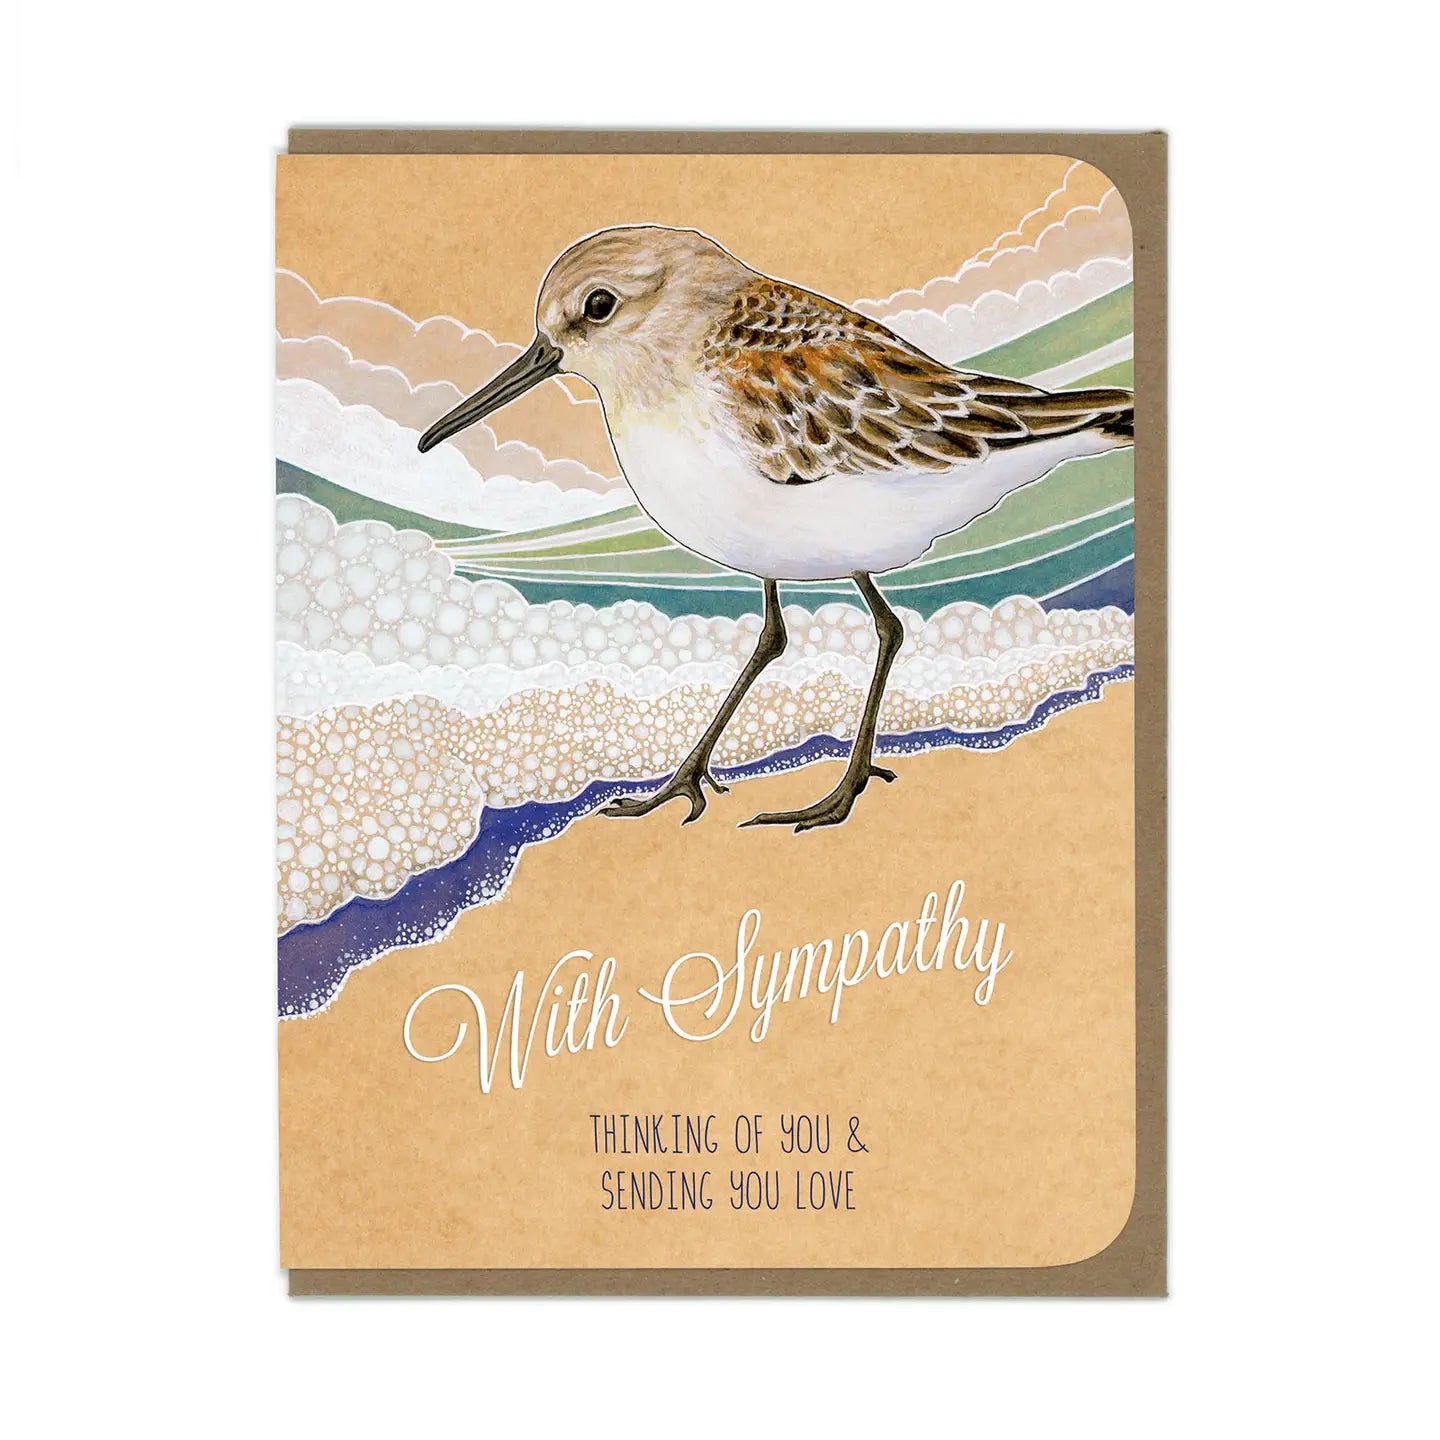 With Sympathy Thinking of you & sending you love Greeting Card